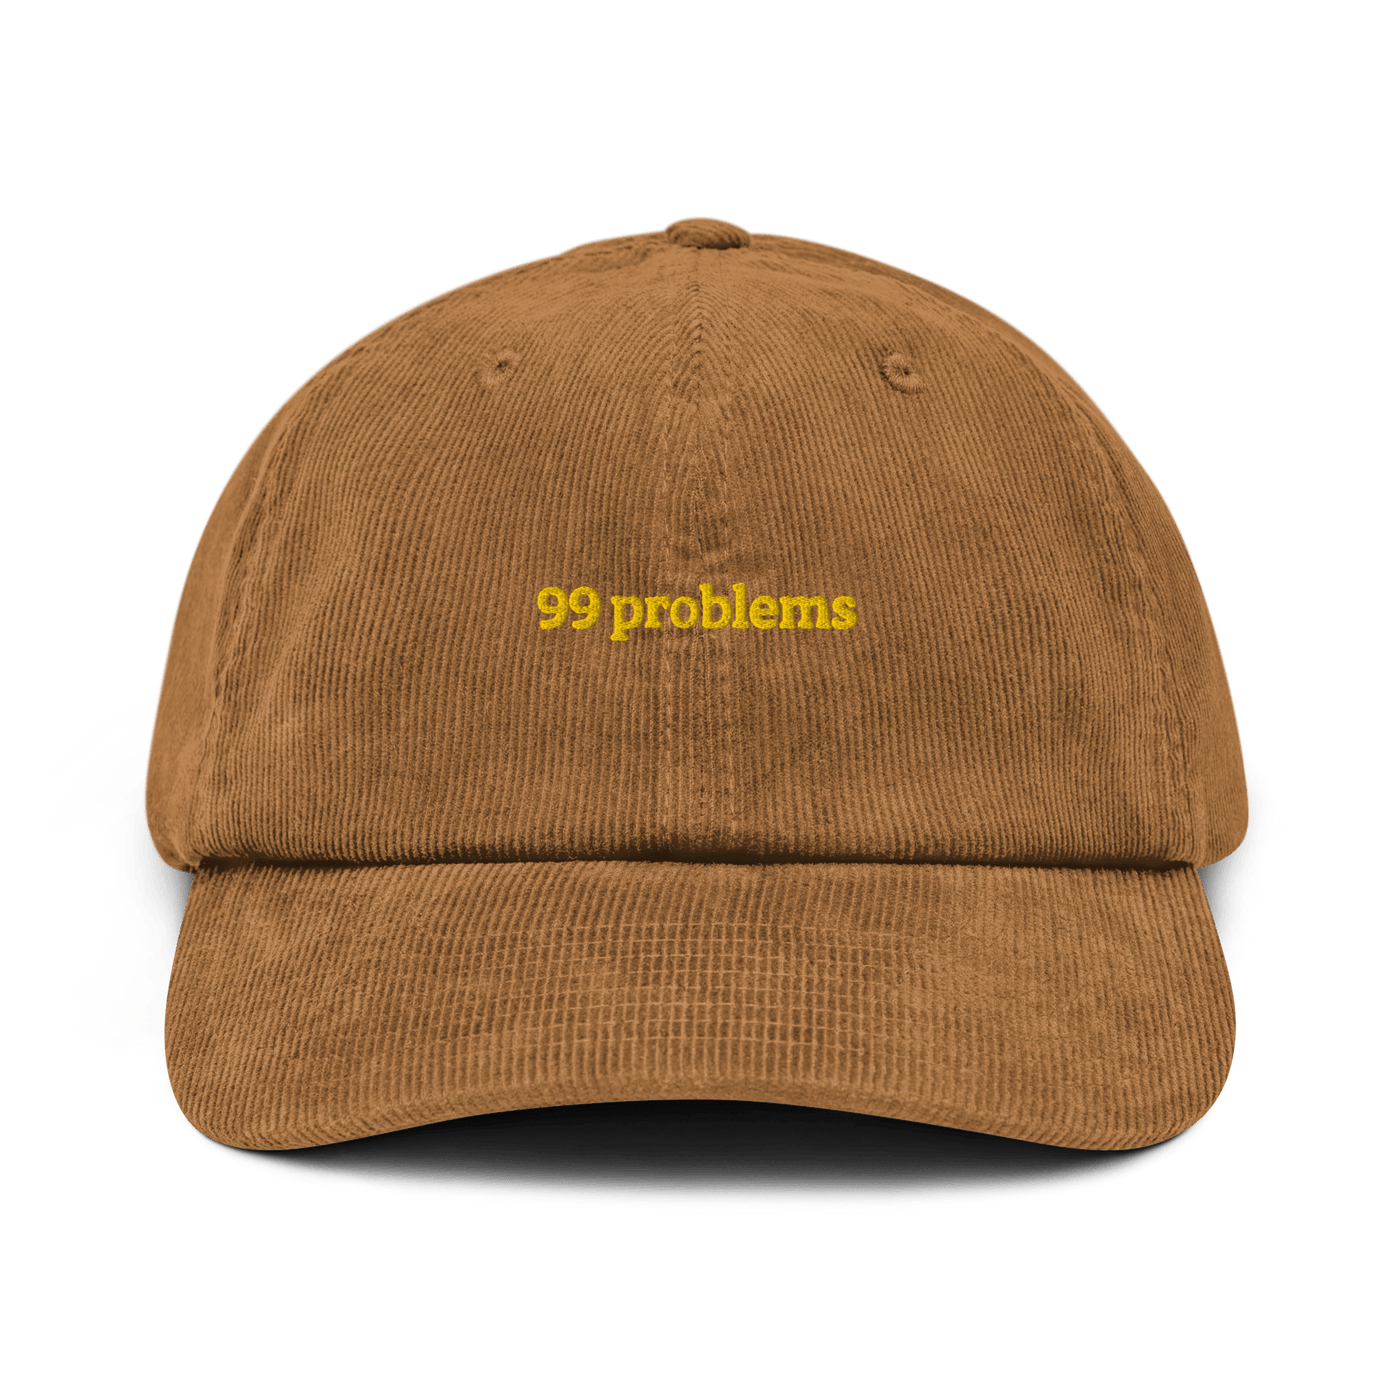 99 problems Corduroy hat - Camel - - Just Another Cap Store